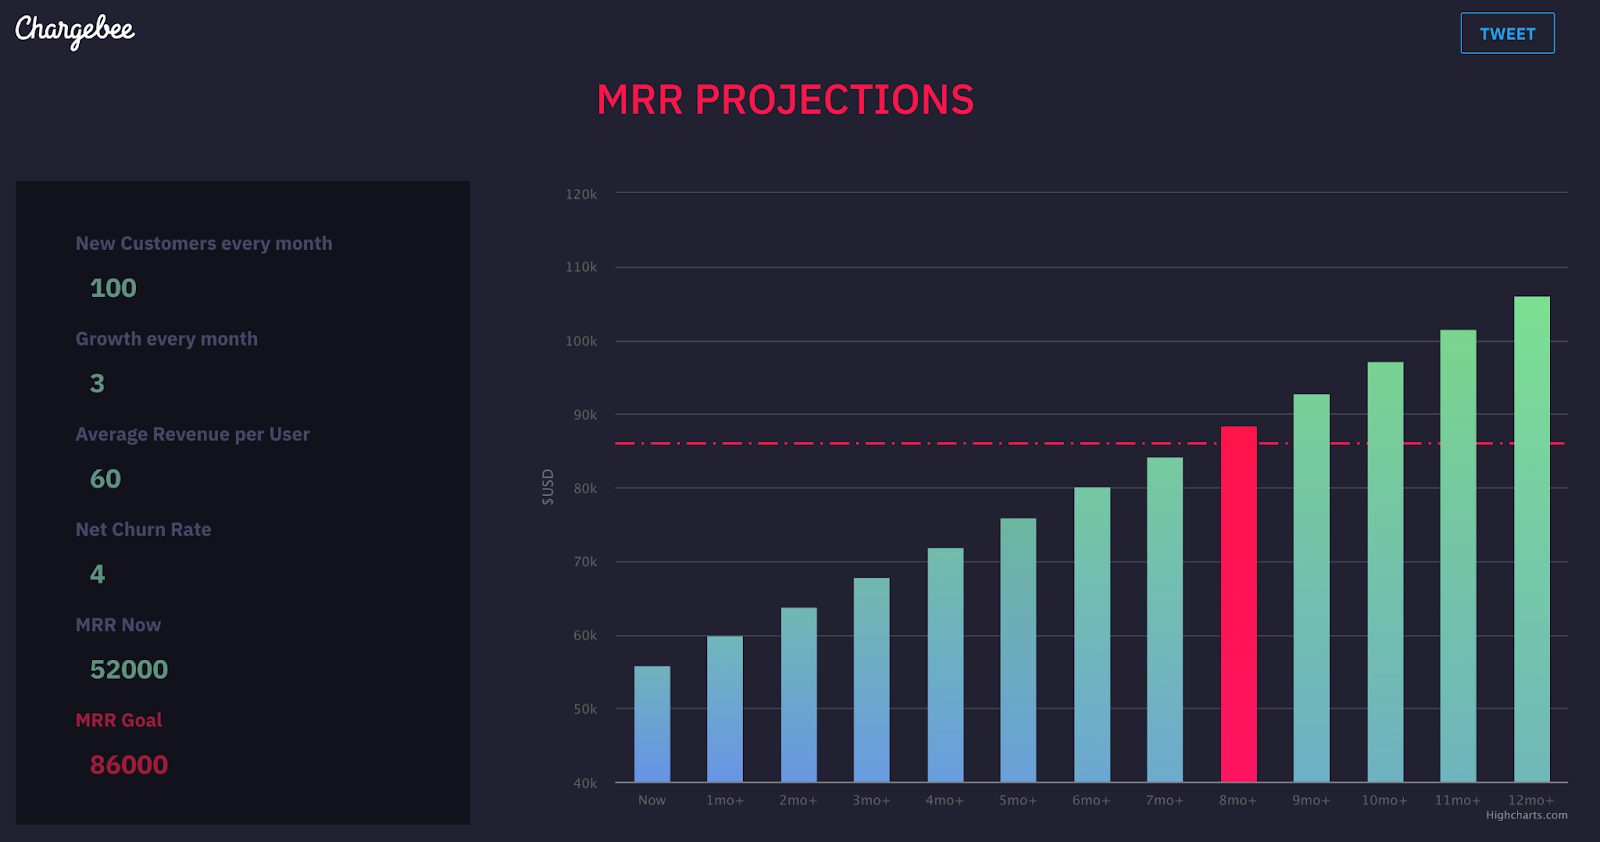 MRR projections chart